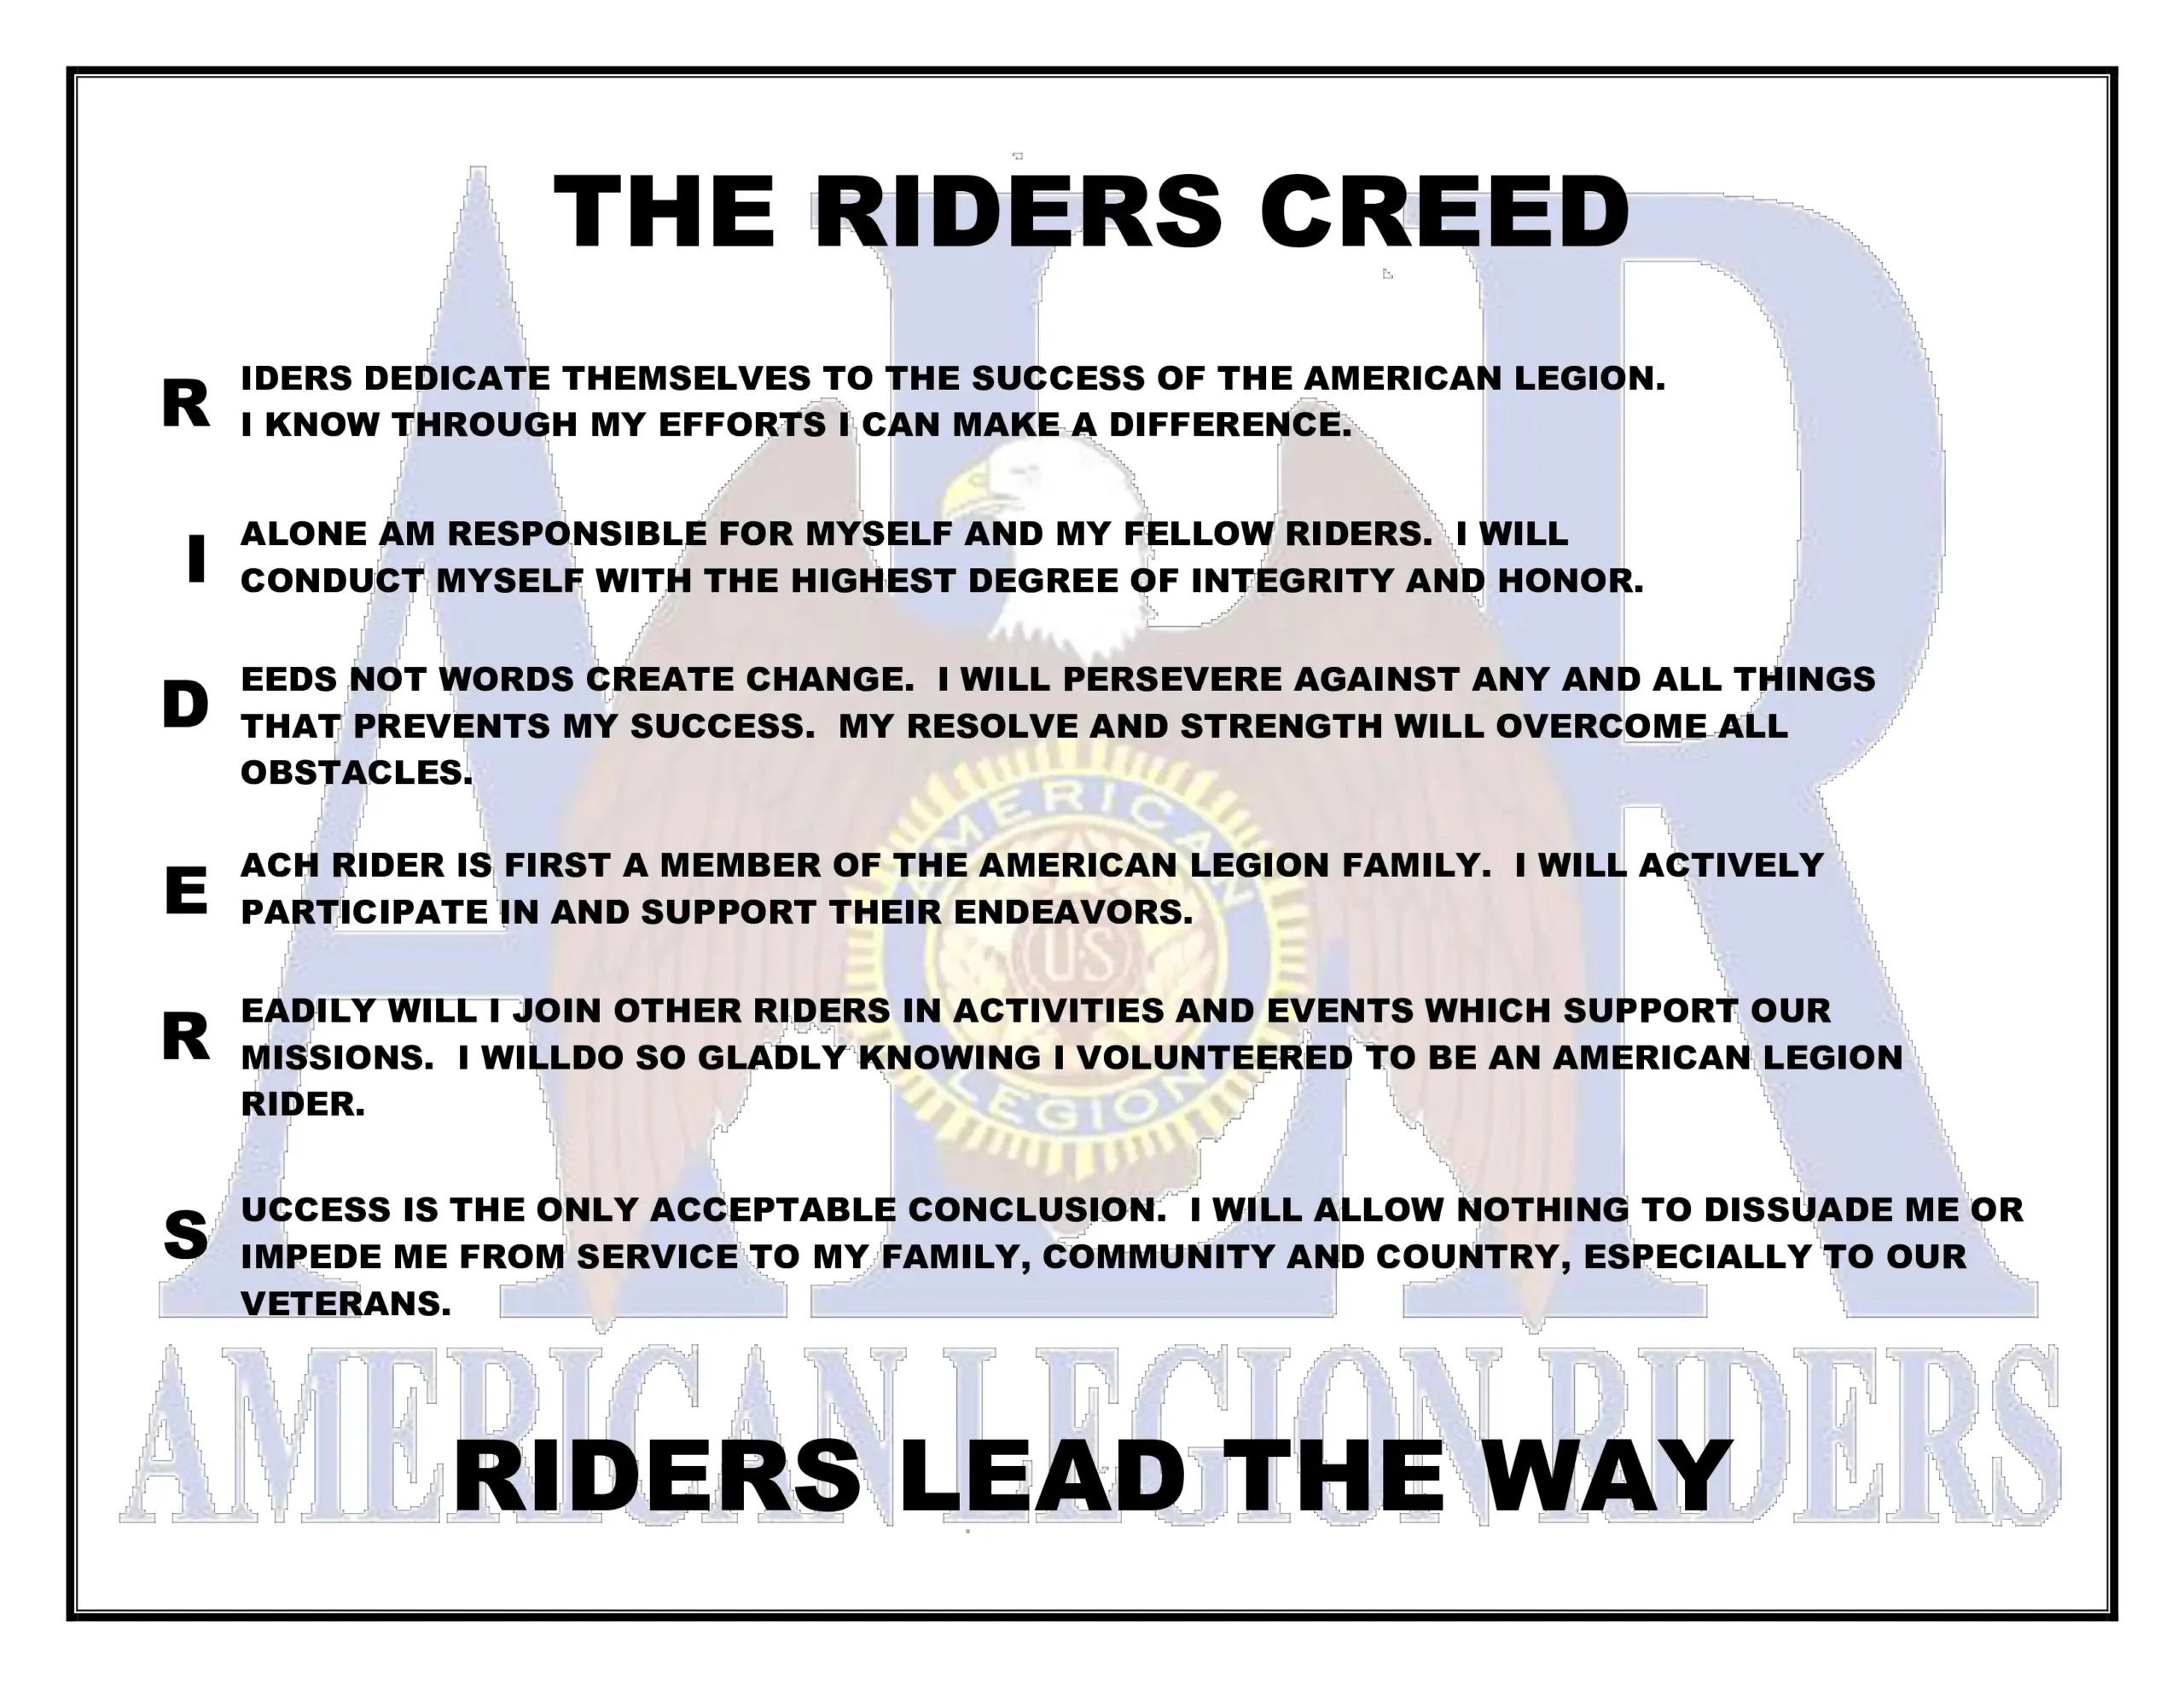 The Riders Creed